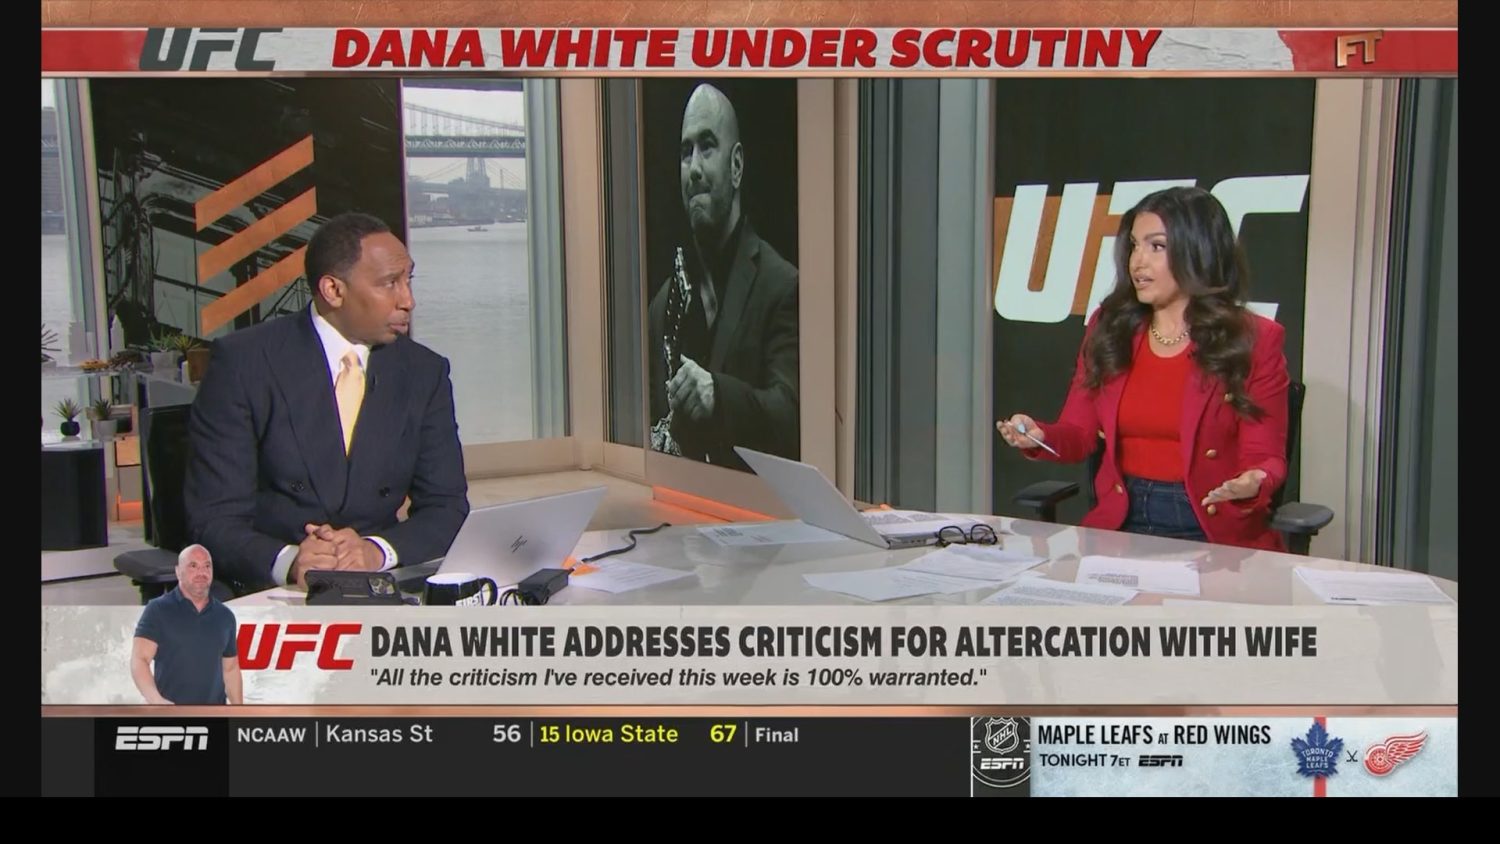 Stephen A. Smith and Molly Qerim discuss Dana White on First Take